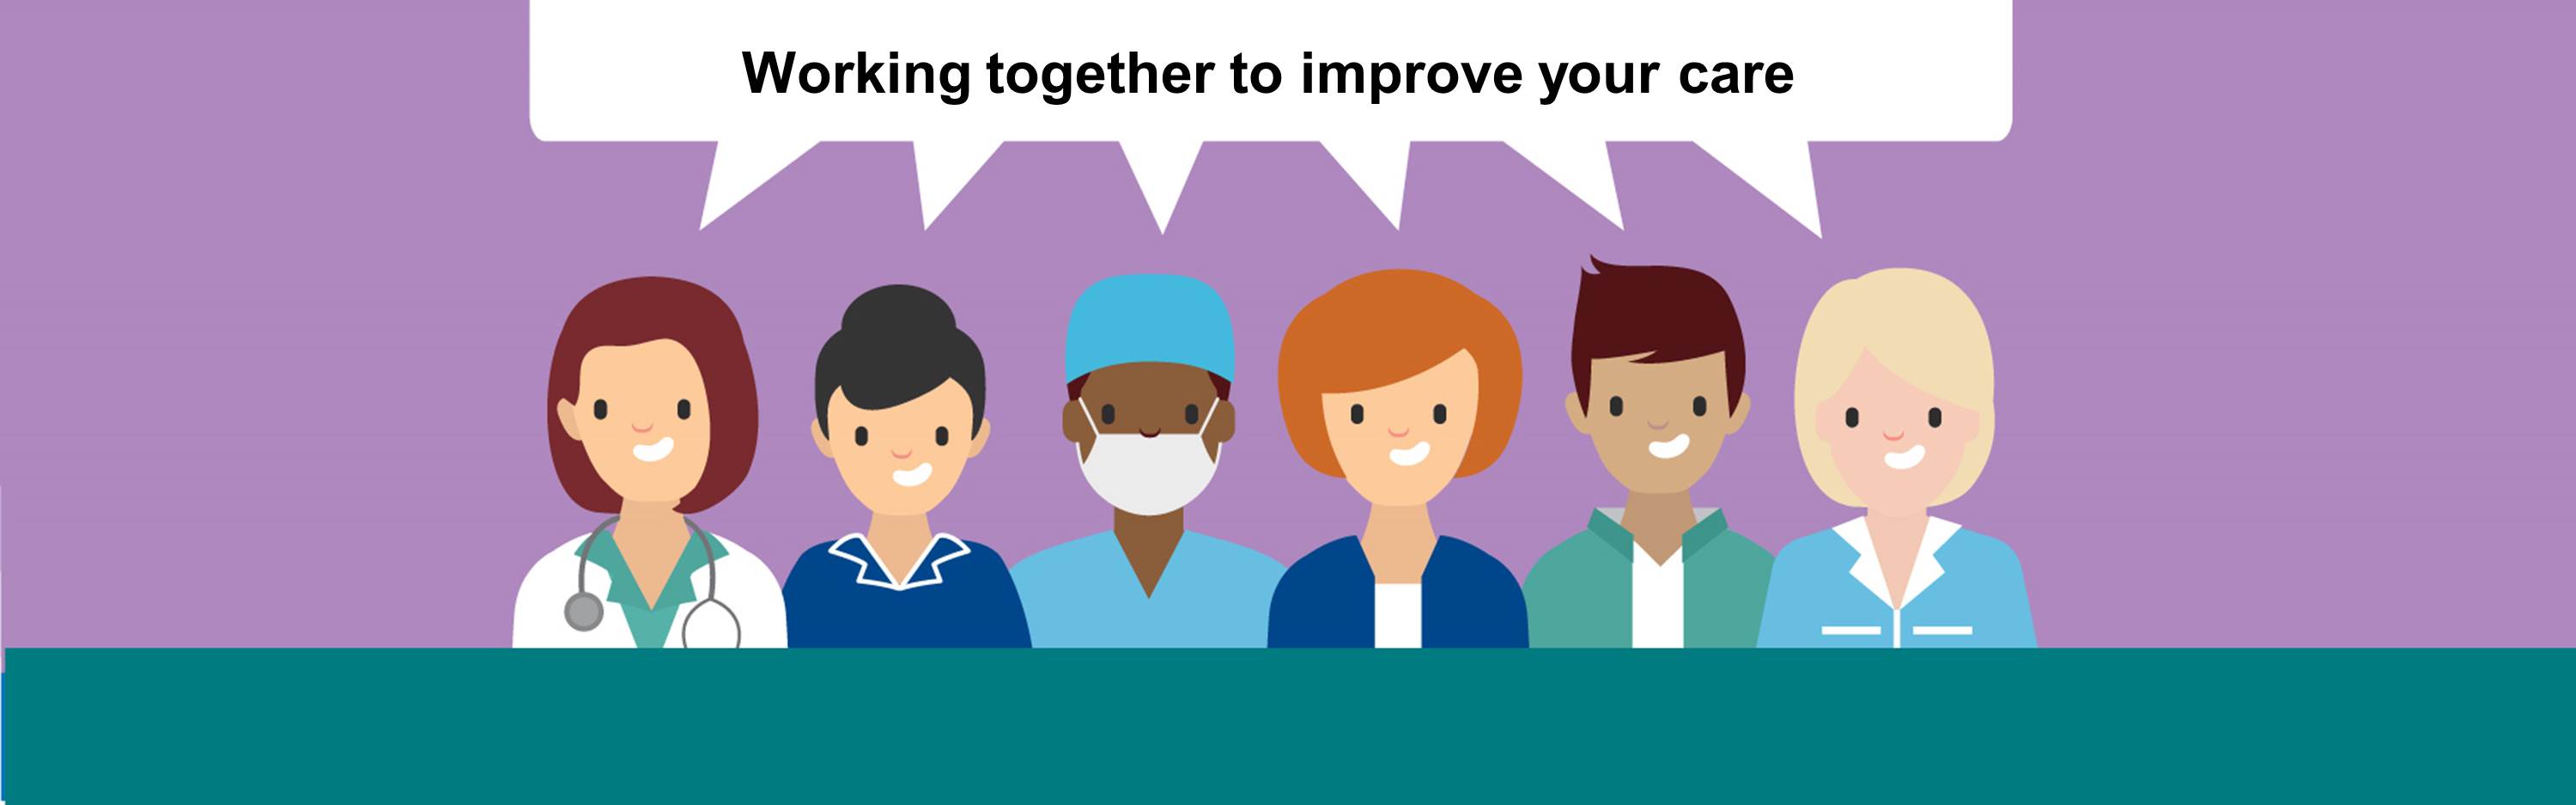 Cartoon 2D characters smiling with a speech bubble above stating'Working together to improve your care'